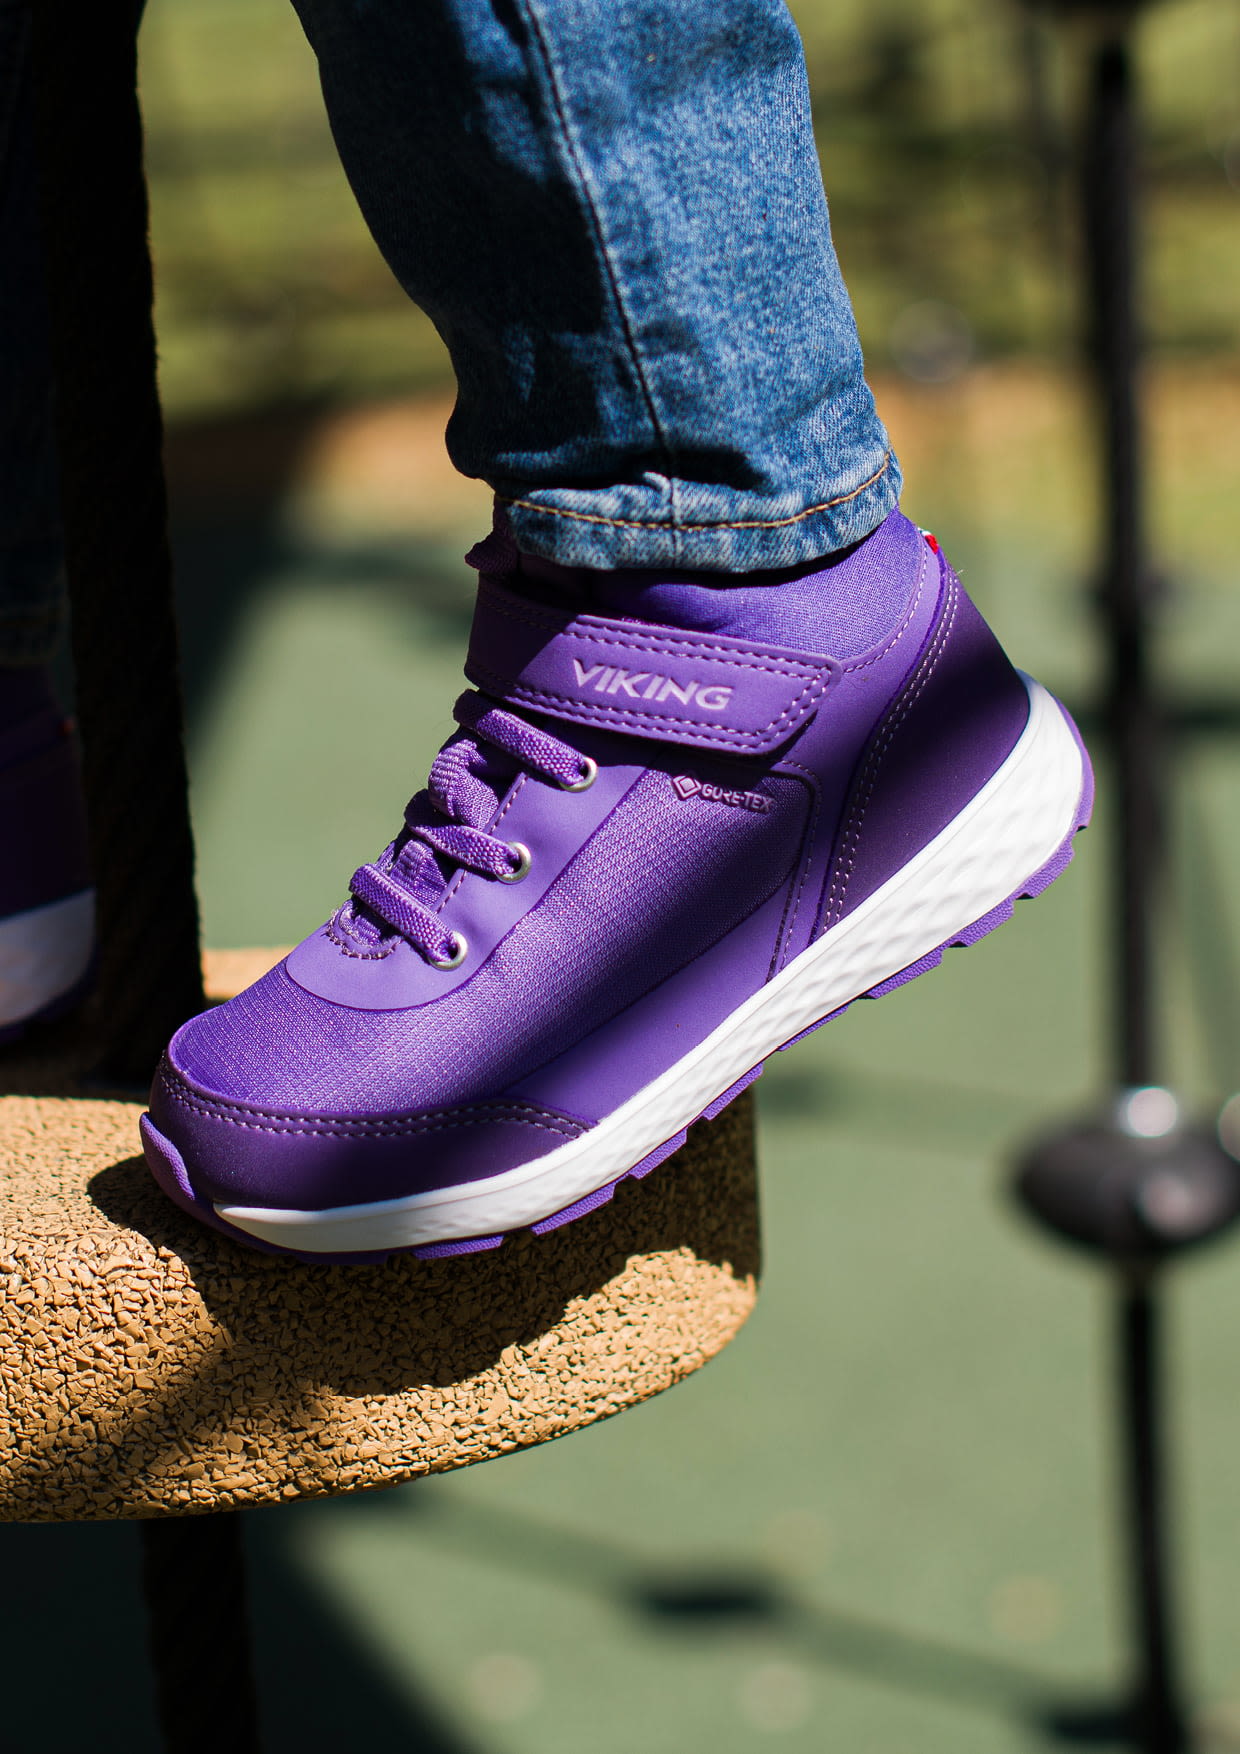 Purple sneakers from Viking at Babyshop